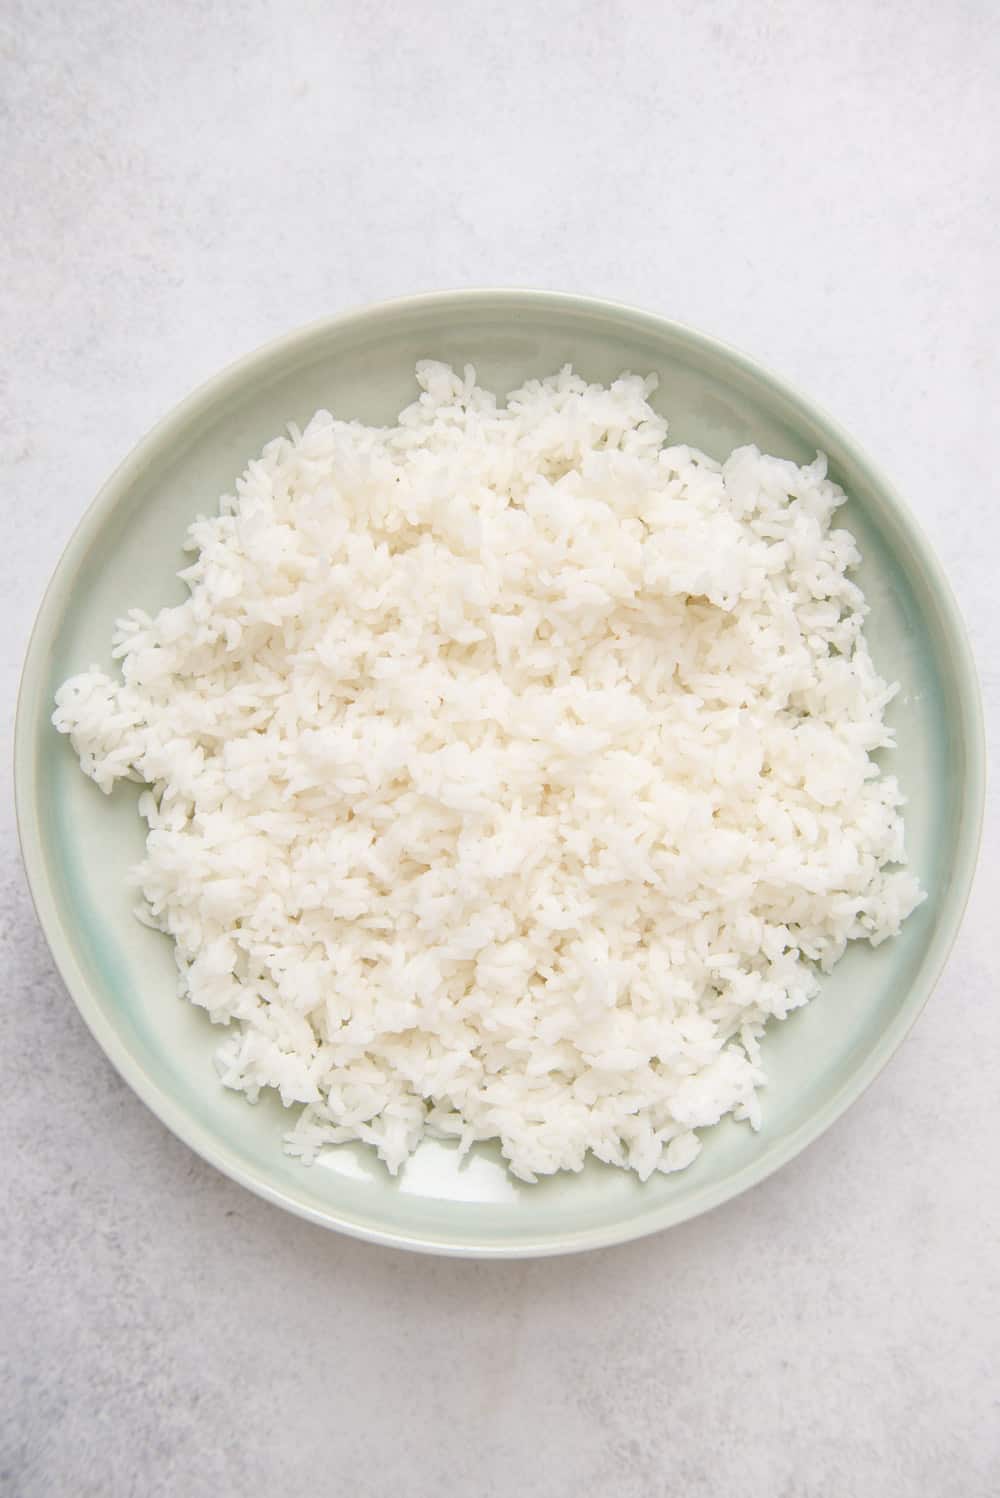 can dogs have jasmine rice?